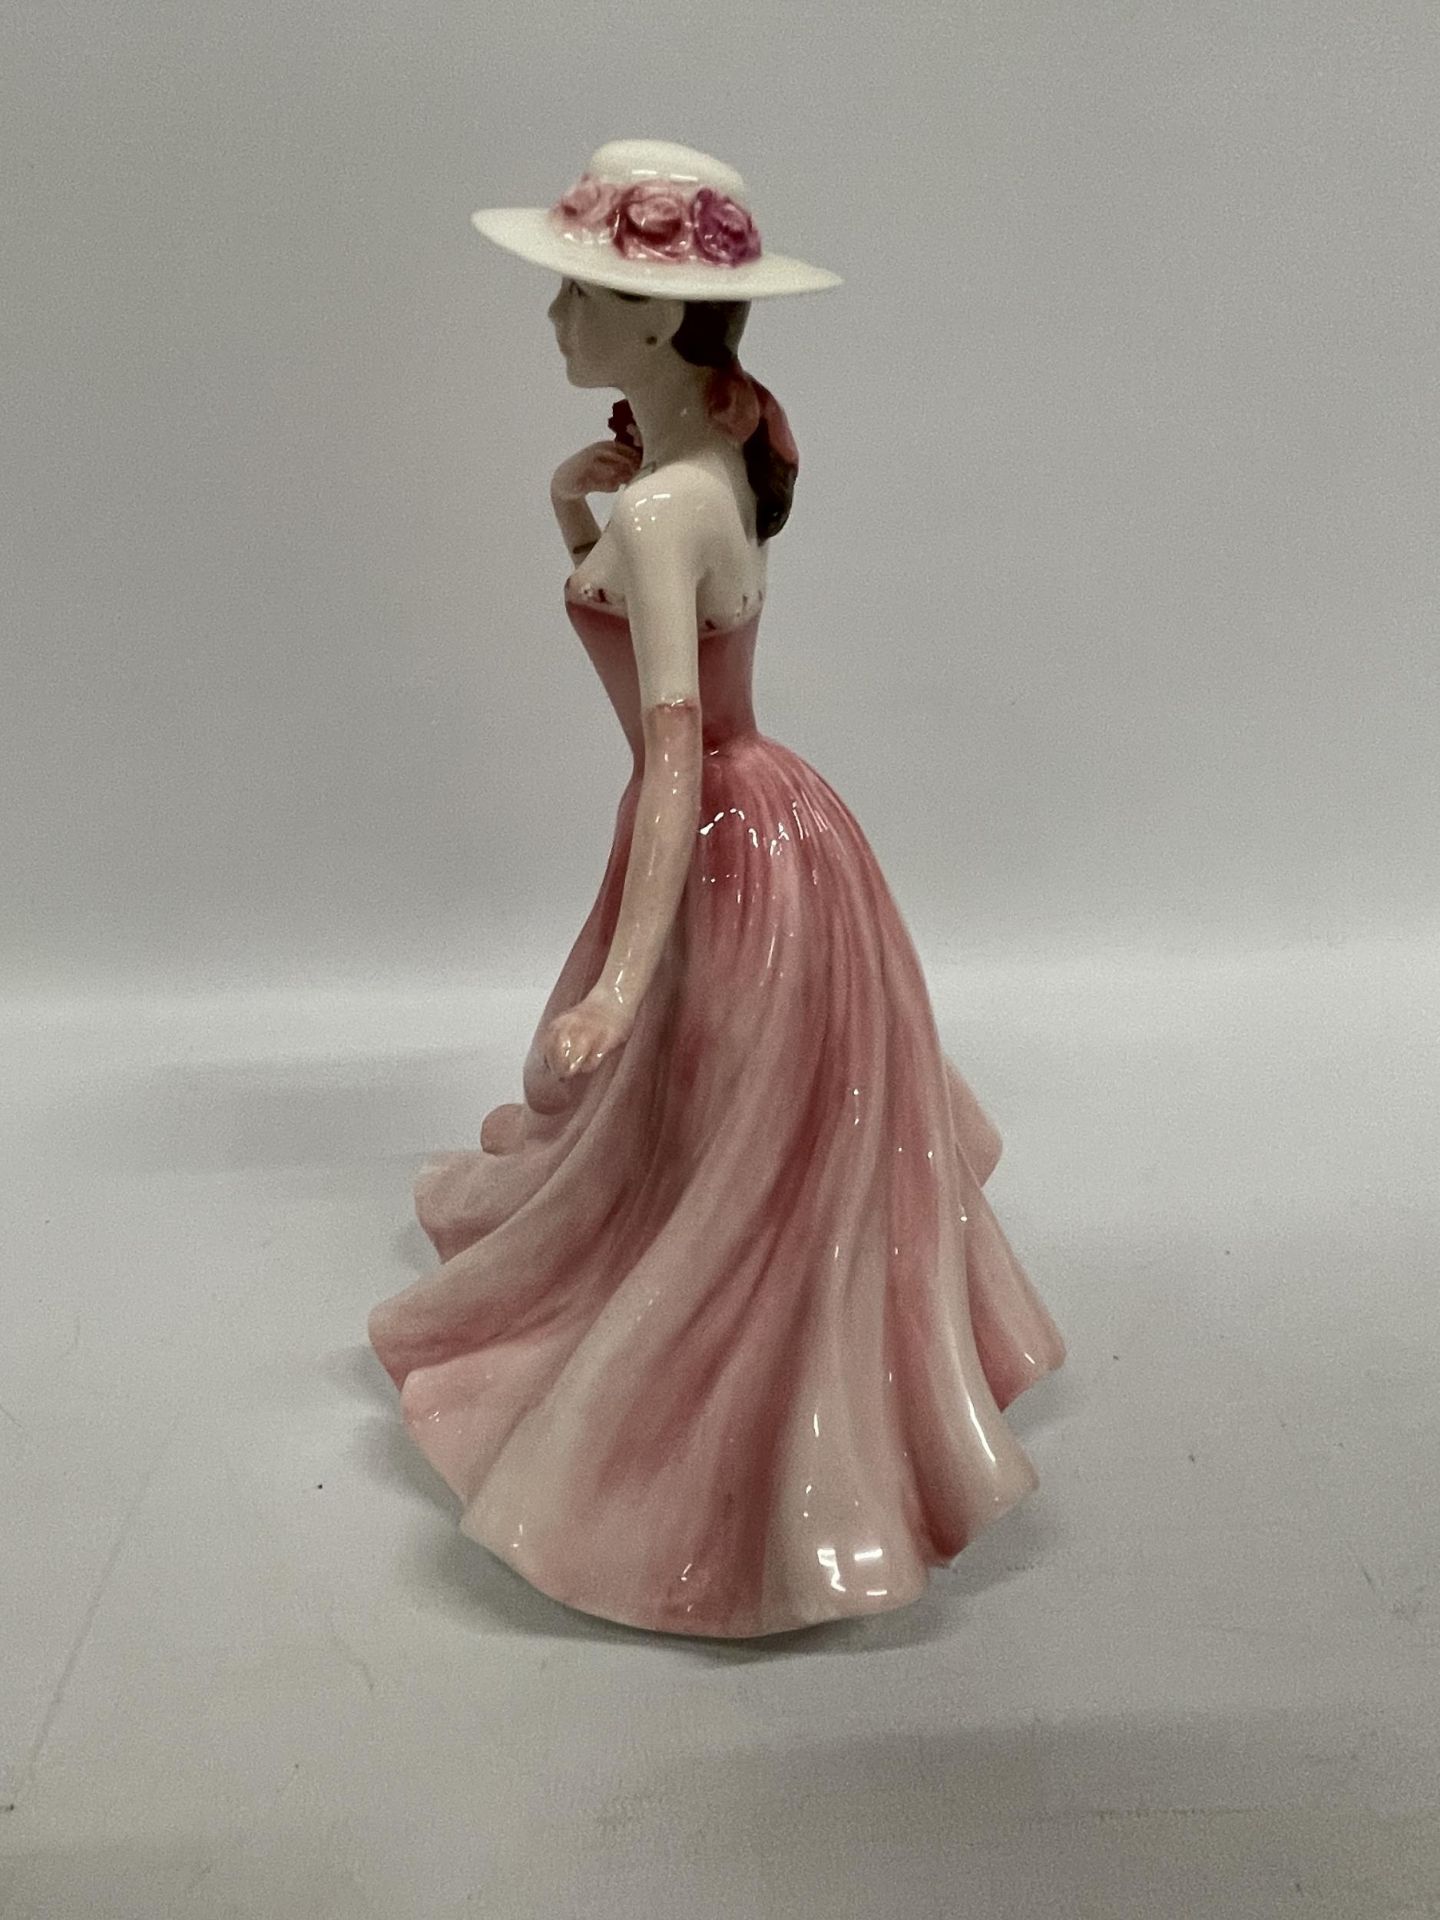 A ROYAL DOULTON 'CHLOE' LADY FO THE YEAR 2000 FIGURE - Image 3 of 4